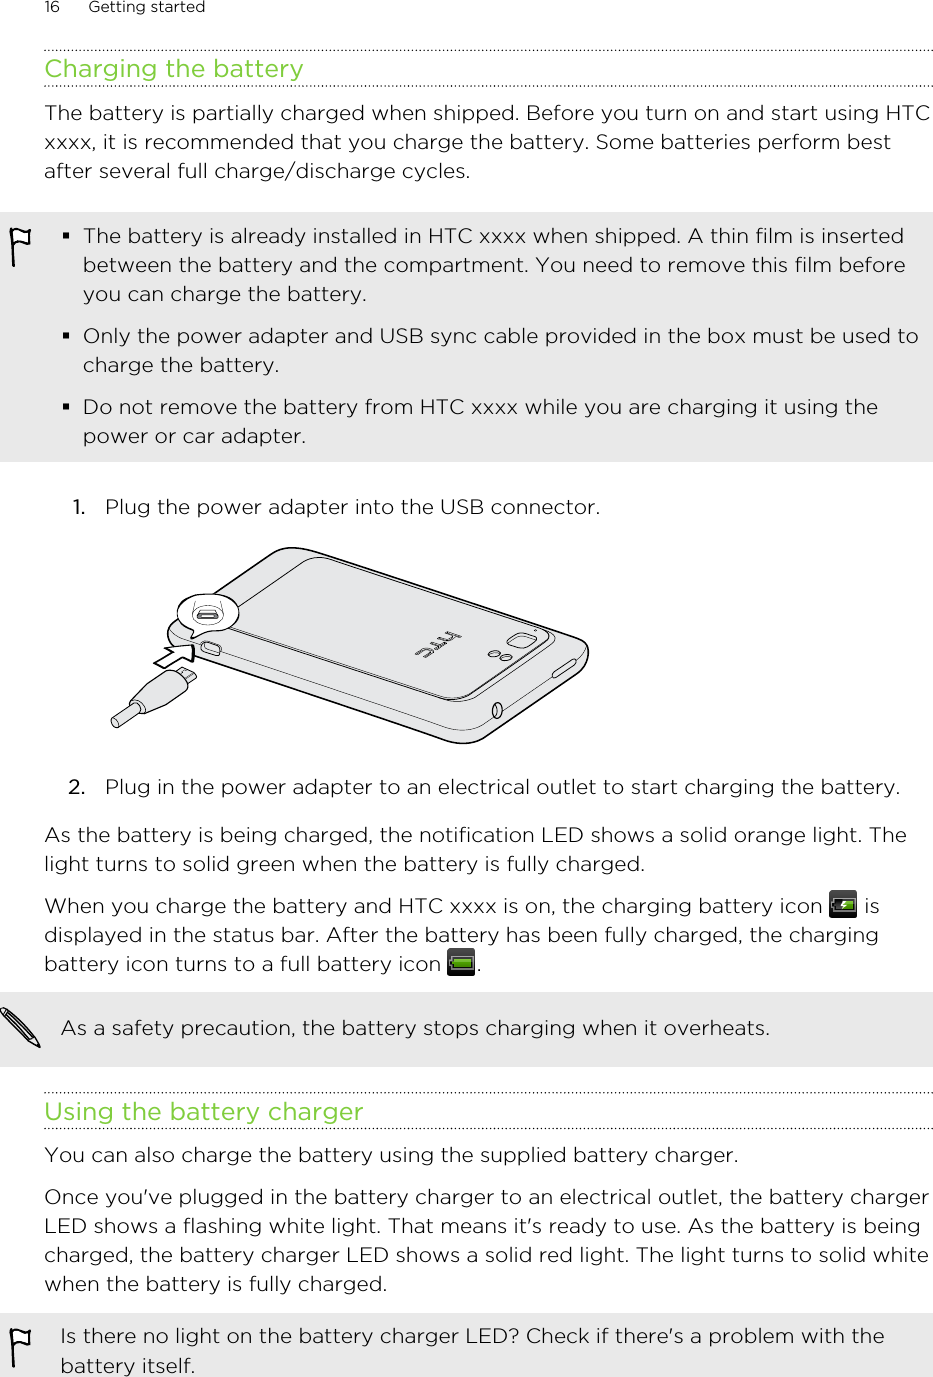 Charging the batteryThe battery is partially charged when shipped. Before you turn on and start using HTCxxxx, it is recommended that you charge the battery. Some batteries perform bestafter several full charge/discharge cycles.§The battery is already installed in HTC xxxx when shipped. A thin film is insertedbetween the battery and the compartment. You need to remove this film beforeyou can charge the battery.§Only the power adapter and USB sync cable provided in the box must be used tocharge the battery.§Do not remove the battery from HTC xxxx while you are charging it using thepower or car adapter.1. Plug the power adapter into the USB connector. 2. Plug in the power adapter to an electrical outlet to start charging the battery.As the battery is being charged, the notification LED shows a solid orange light. Thelight turns to solid green when the battery is fully charged.When you charge the battery and HTC xxxx is on, the charging battery icon   isdisplayed in the status bar. After the battery has been fully charged, the chargingbattery icon turns to a full battery icon  .As a safety precaution, the battery stops charging when it overheats.Using the battery chargerYou can also charge the battery using the supplied battery charger.Once you&apos;ve plugged in the battery charger to an electrical outlet, the battery chargerLED shows a flashing white light. That means it&apos;s ready to use. As the battery is beingcharged, the battery charger LED shows a solid red light. The light turns to solid whitewhen the battery is fully charged.Is there no light on the battery charger LED? Check if there&apos;s a problem with thebattery itself.16 Getting started